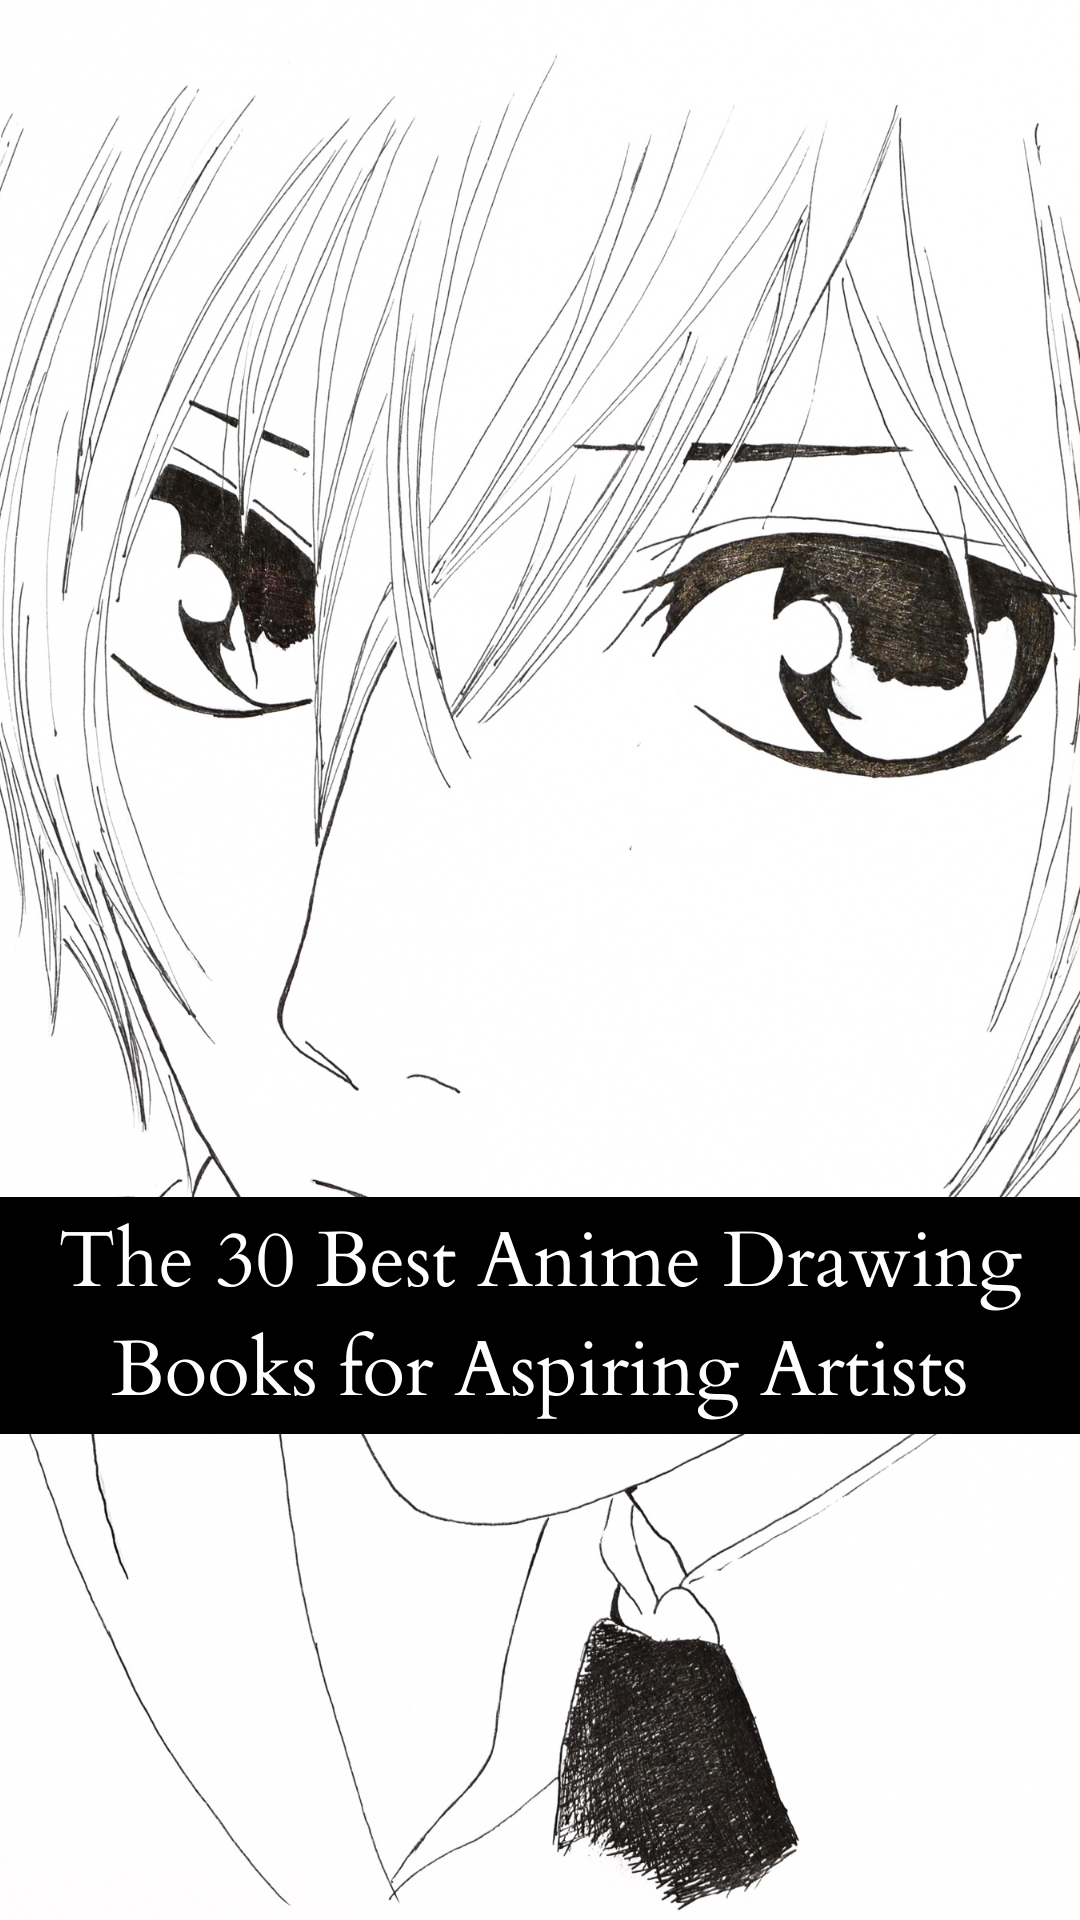 the strongest manga drawing art book Japanese culture How to draw a manga  Anime